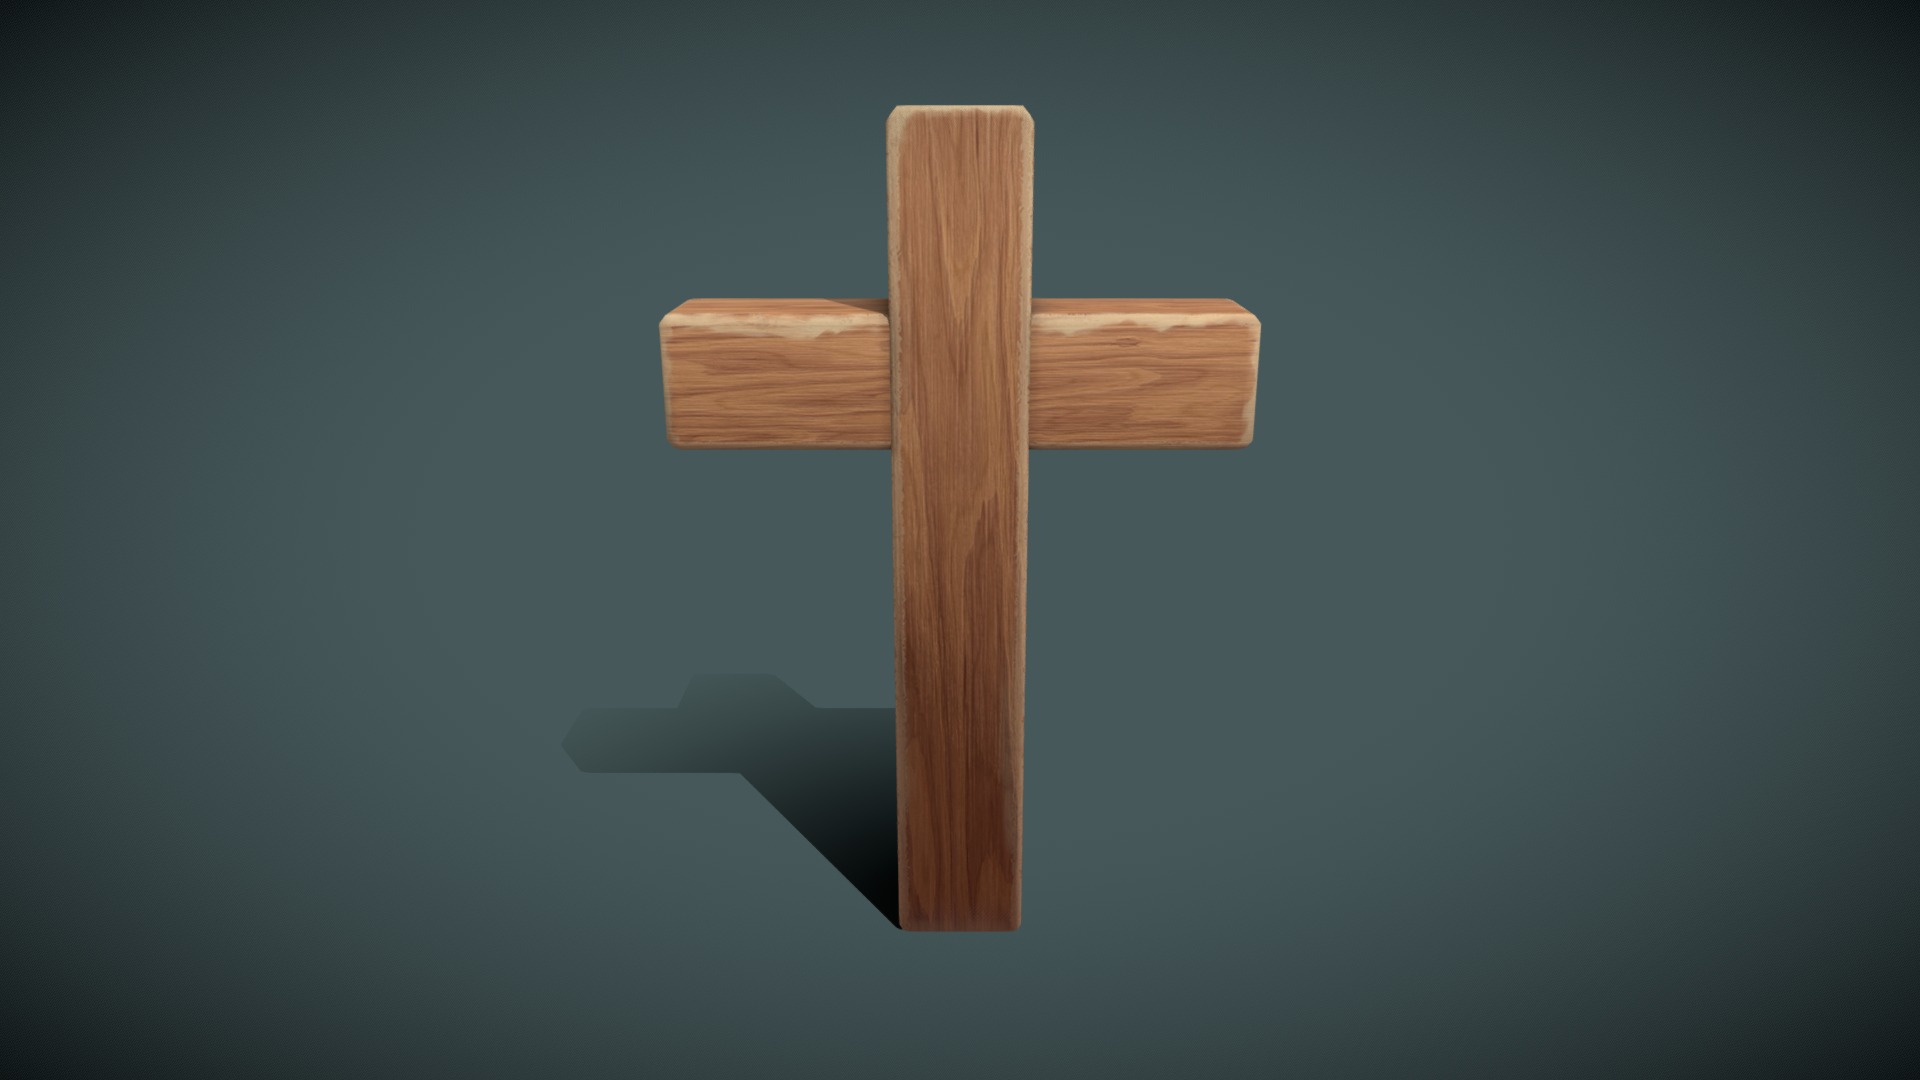 3D model Wooden Cross 3D Model - This is a 3D model of the Wooden Cross 3D Model. The 3D model is about a wooden cross on a blue background.